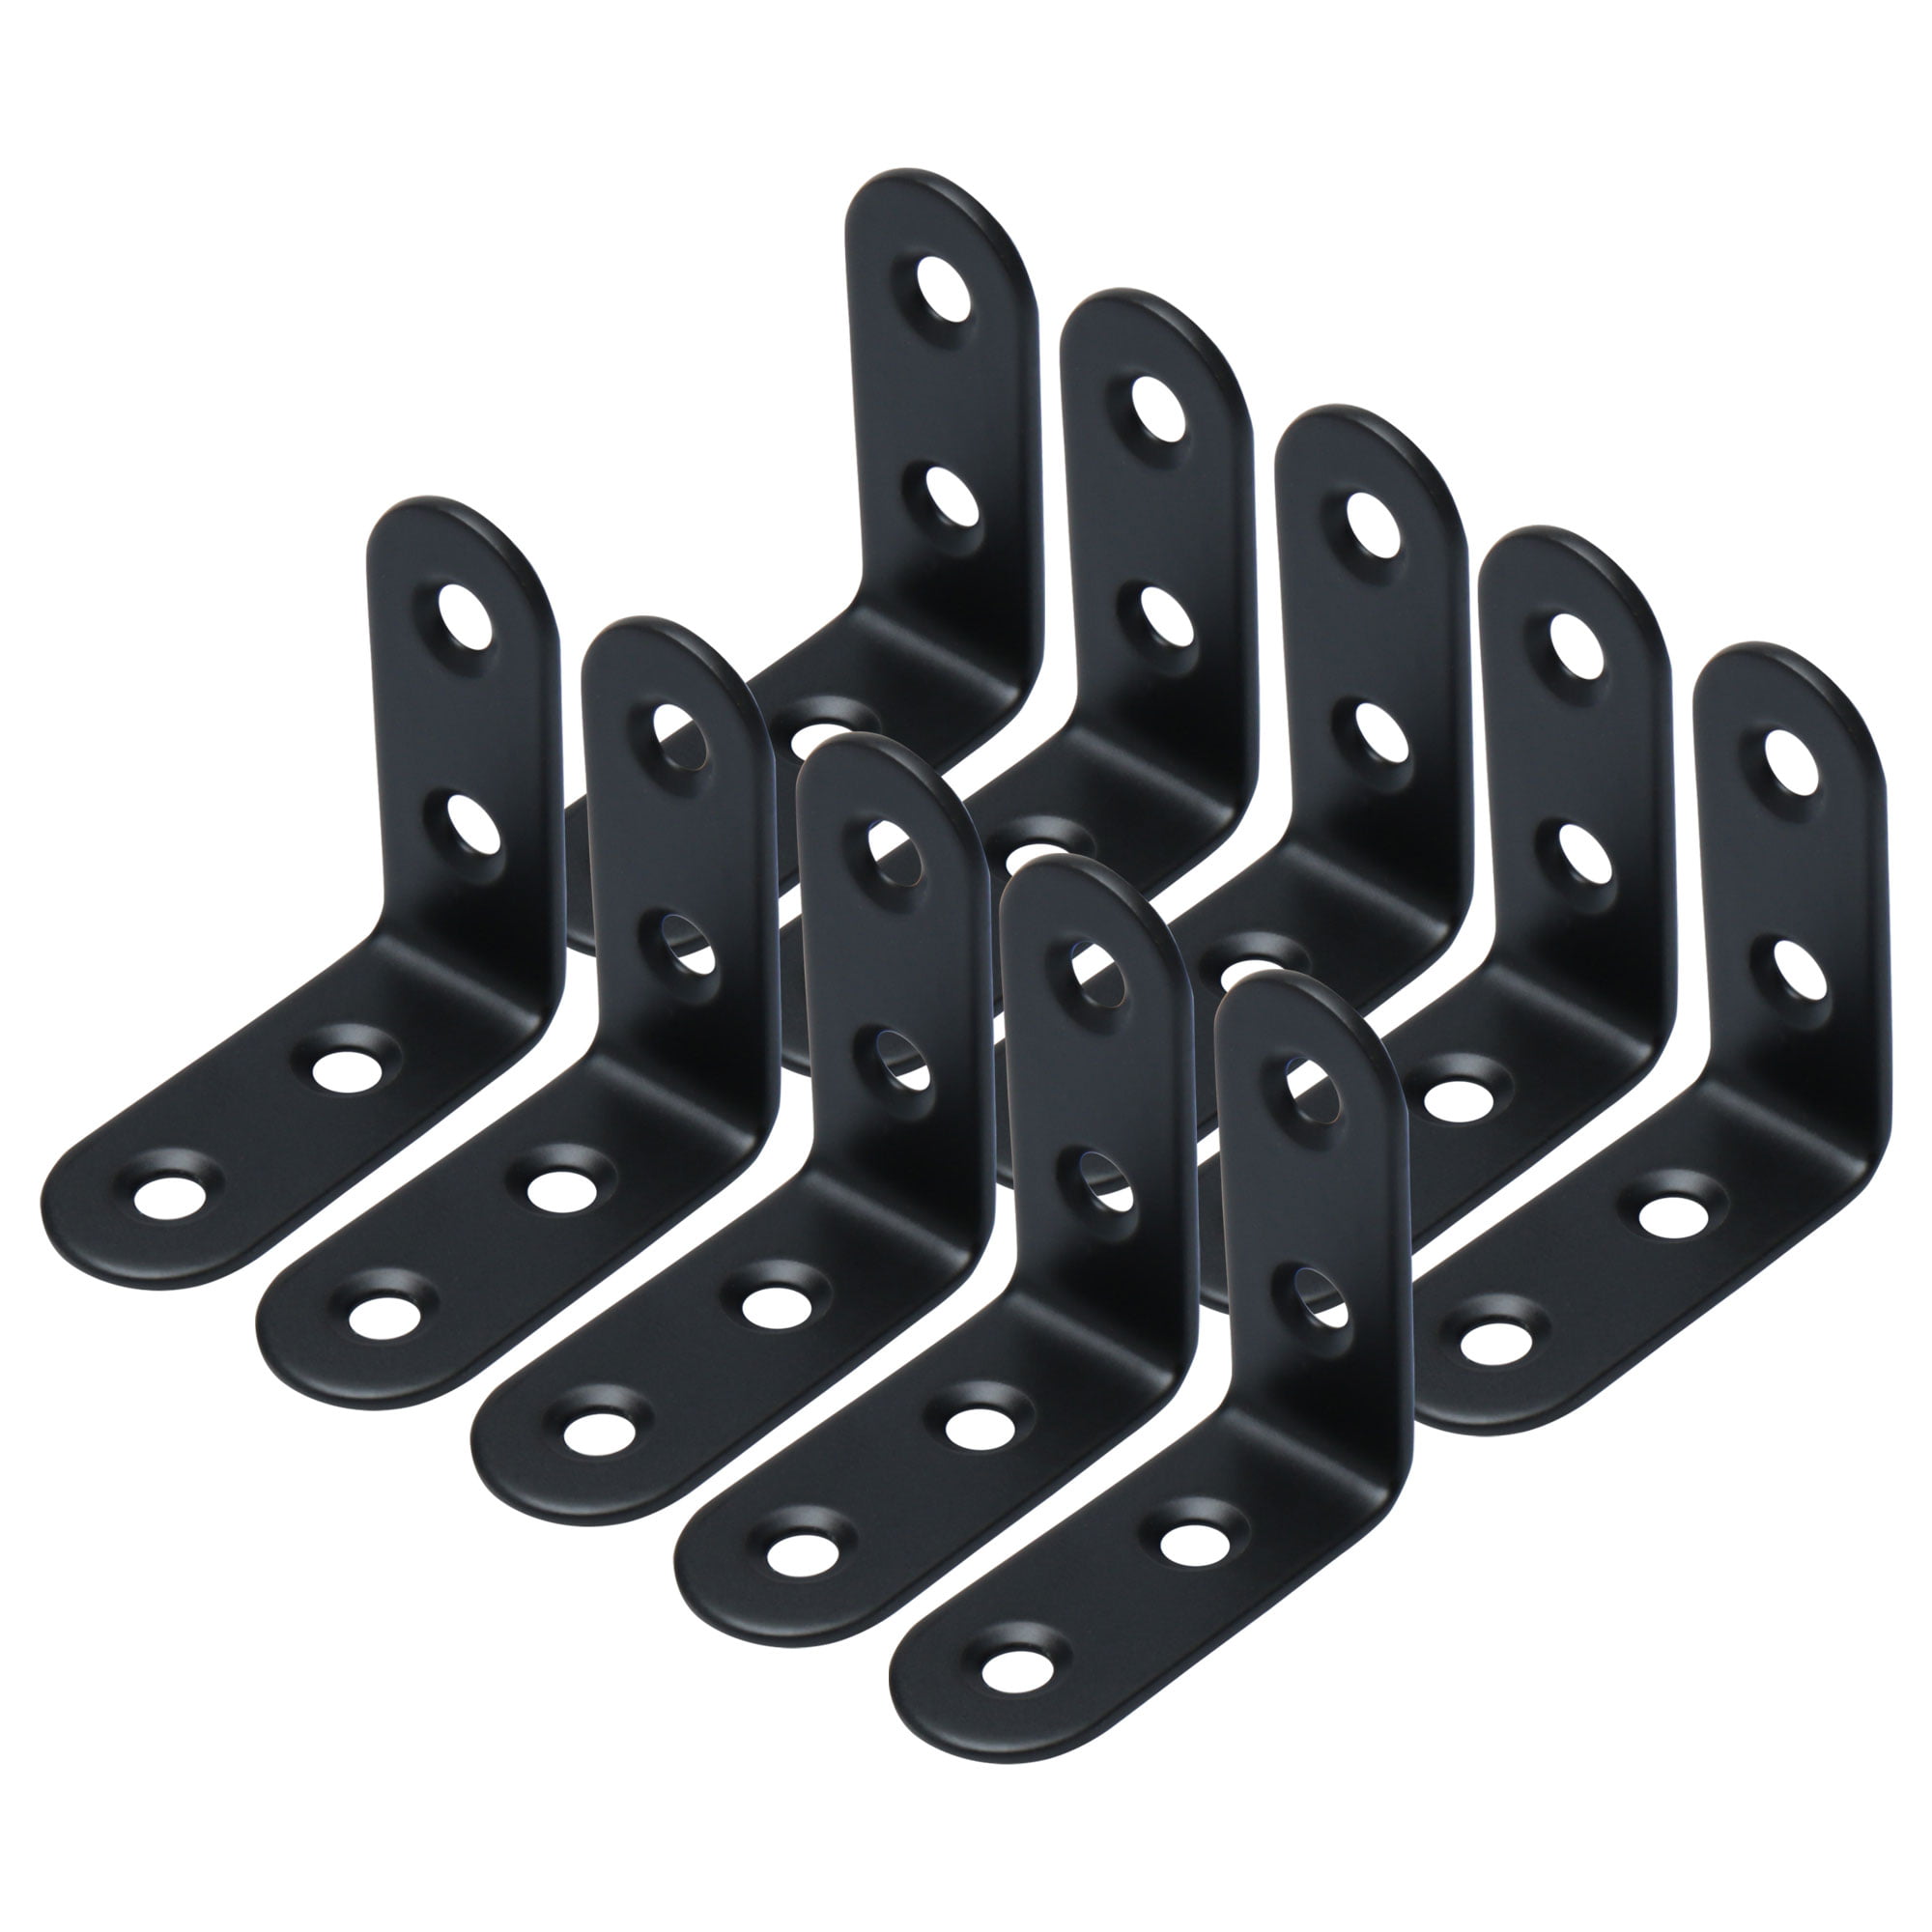 Black Corner Braces Joint Right Angle Bracket Fastener 15 Pieces Stainless Steel L Bracket 60 Pieces Screws and 1 Pair Gloves Included Heavy Duty 90 Degree Right Angled Braces 40 x 40 mm 